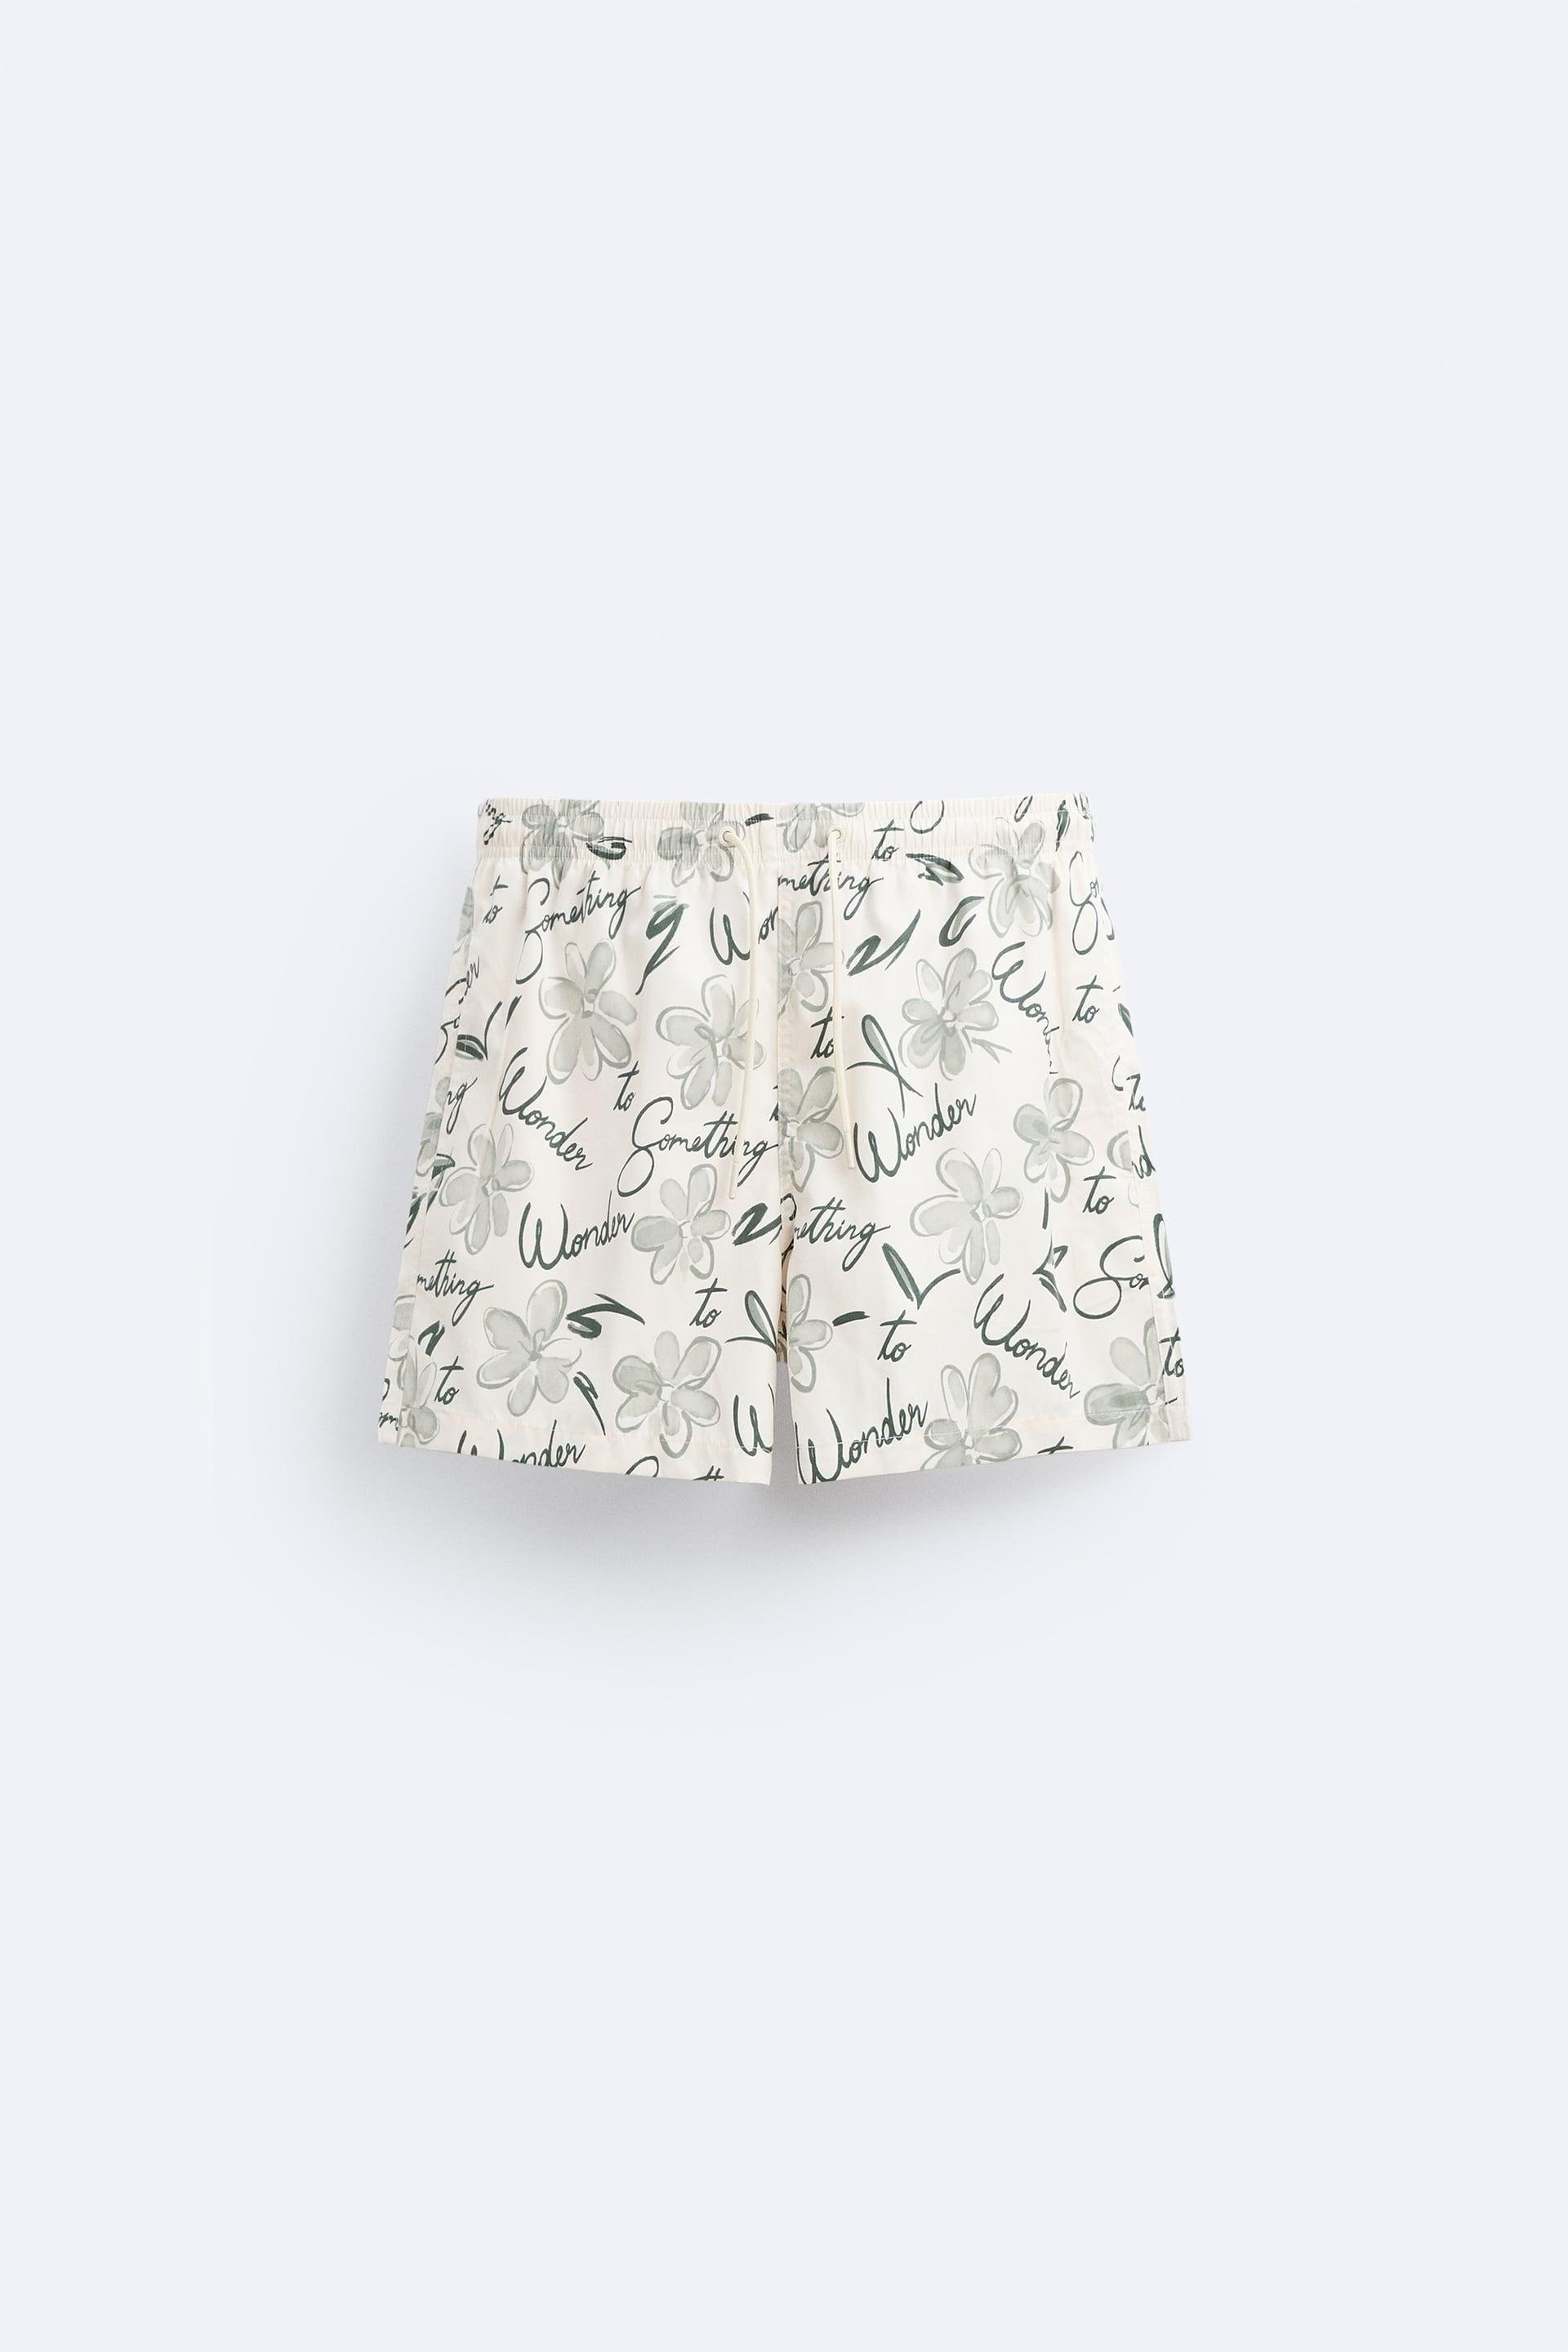 FLORAL PRINT SWIMMING TRUNKS by ZARA